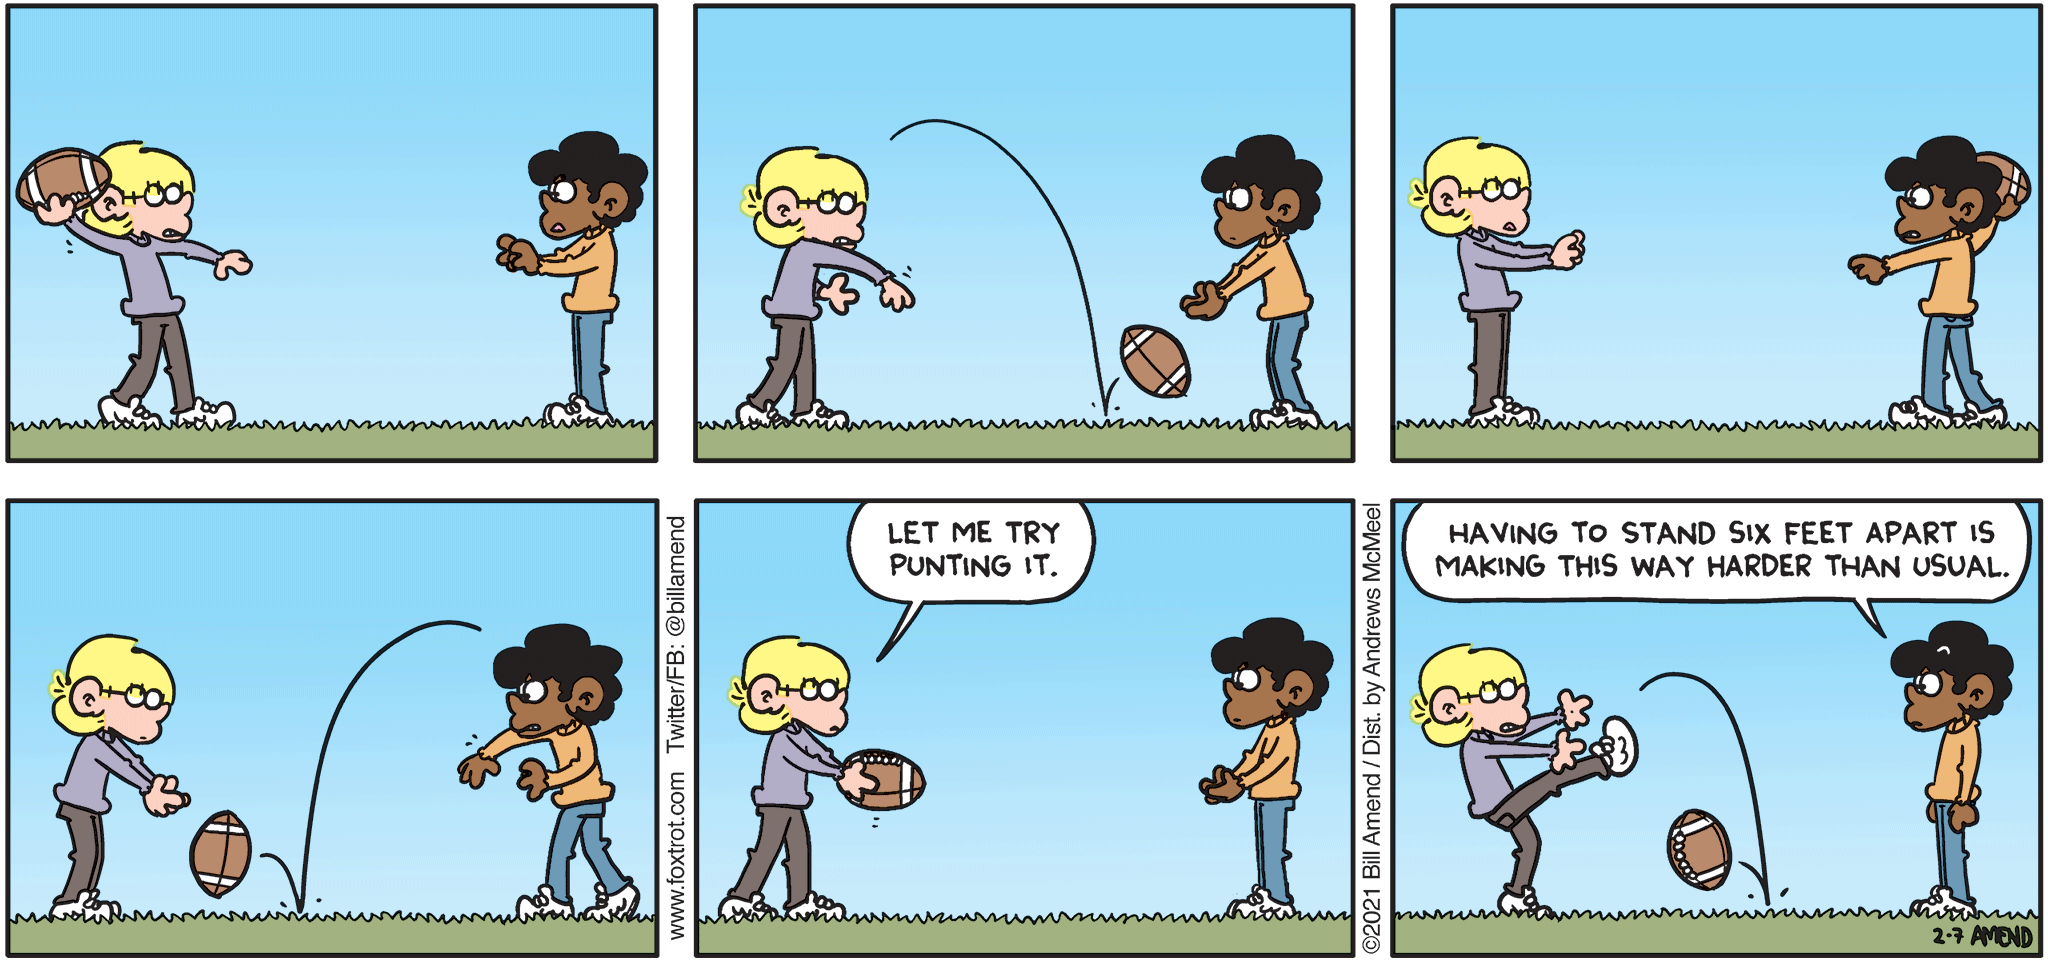 FoxTrot comic strip by Bill Amend - "Six Foot Ball" published February 7, 2021 - Jason Fox: Let me try punting it. Marcus: Having to stand six feet apart is making this way harder than usual.